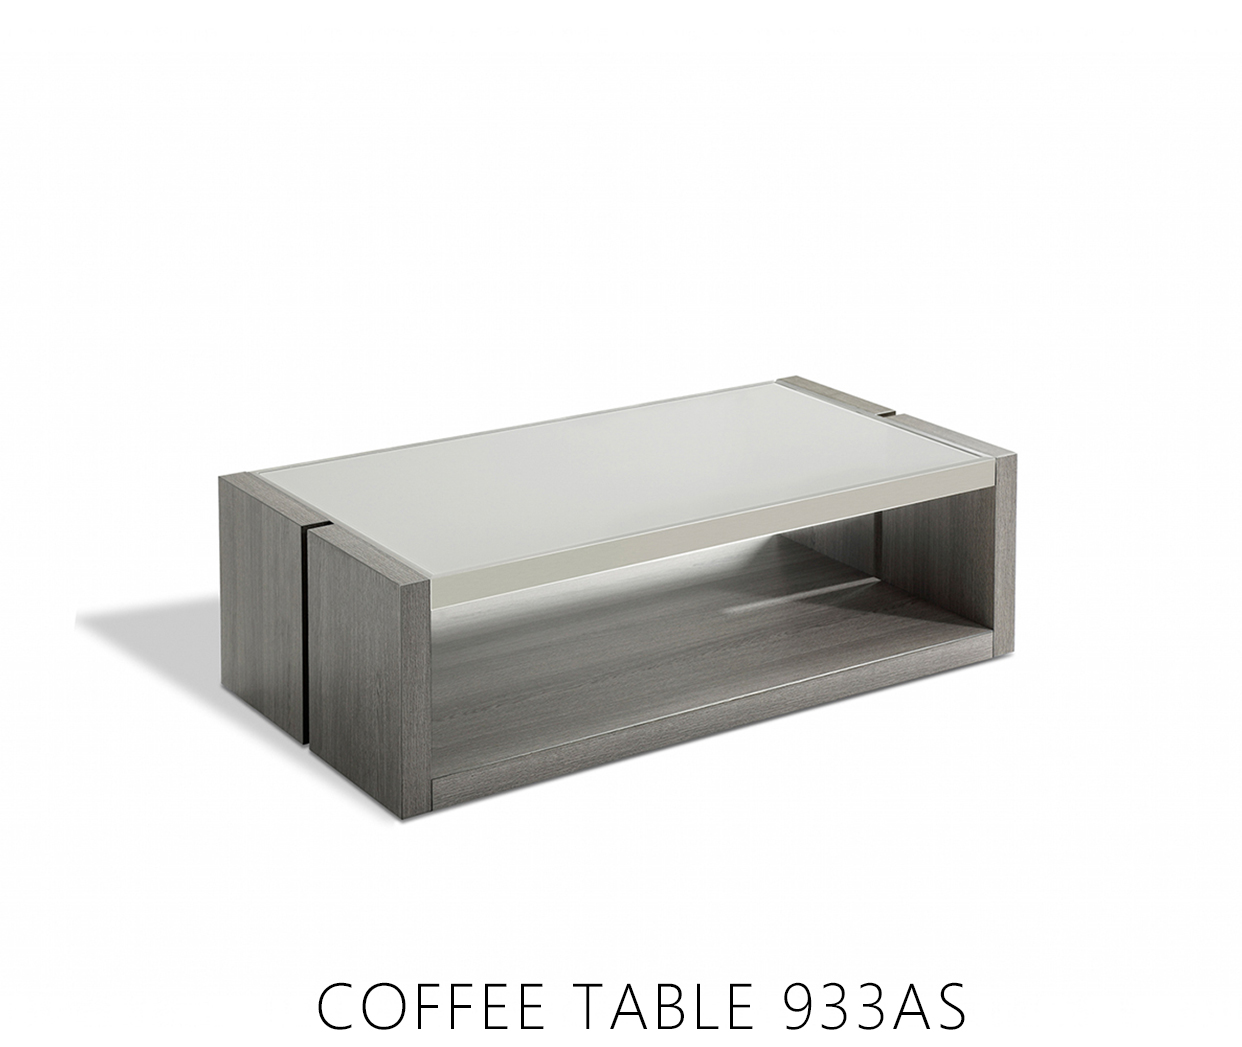 COFFEE TABLE 933AS